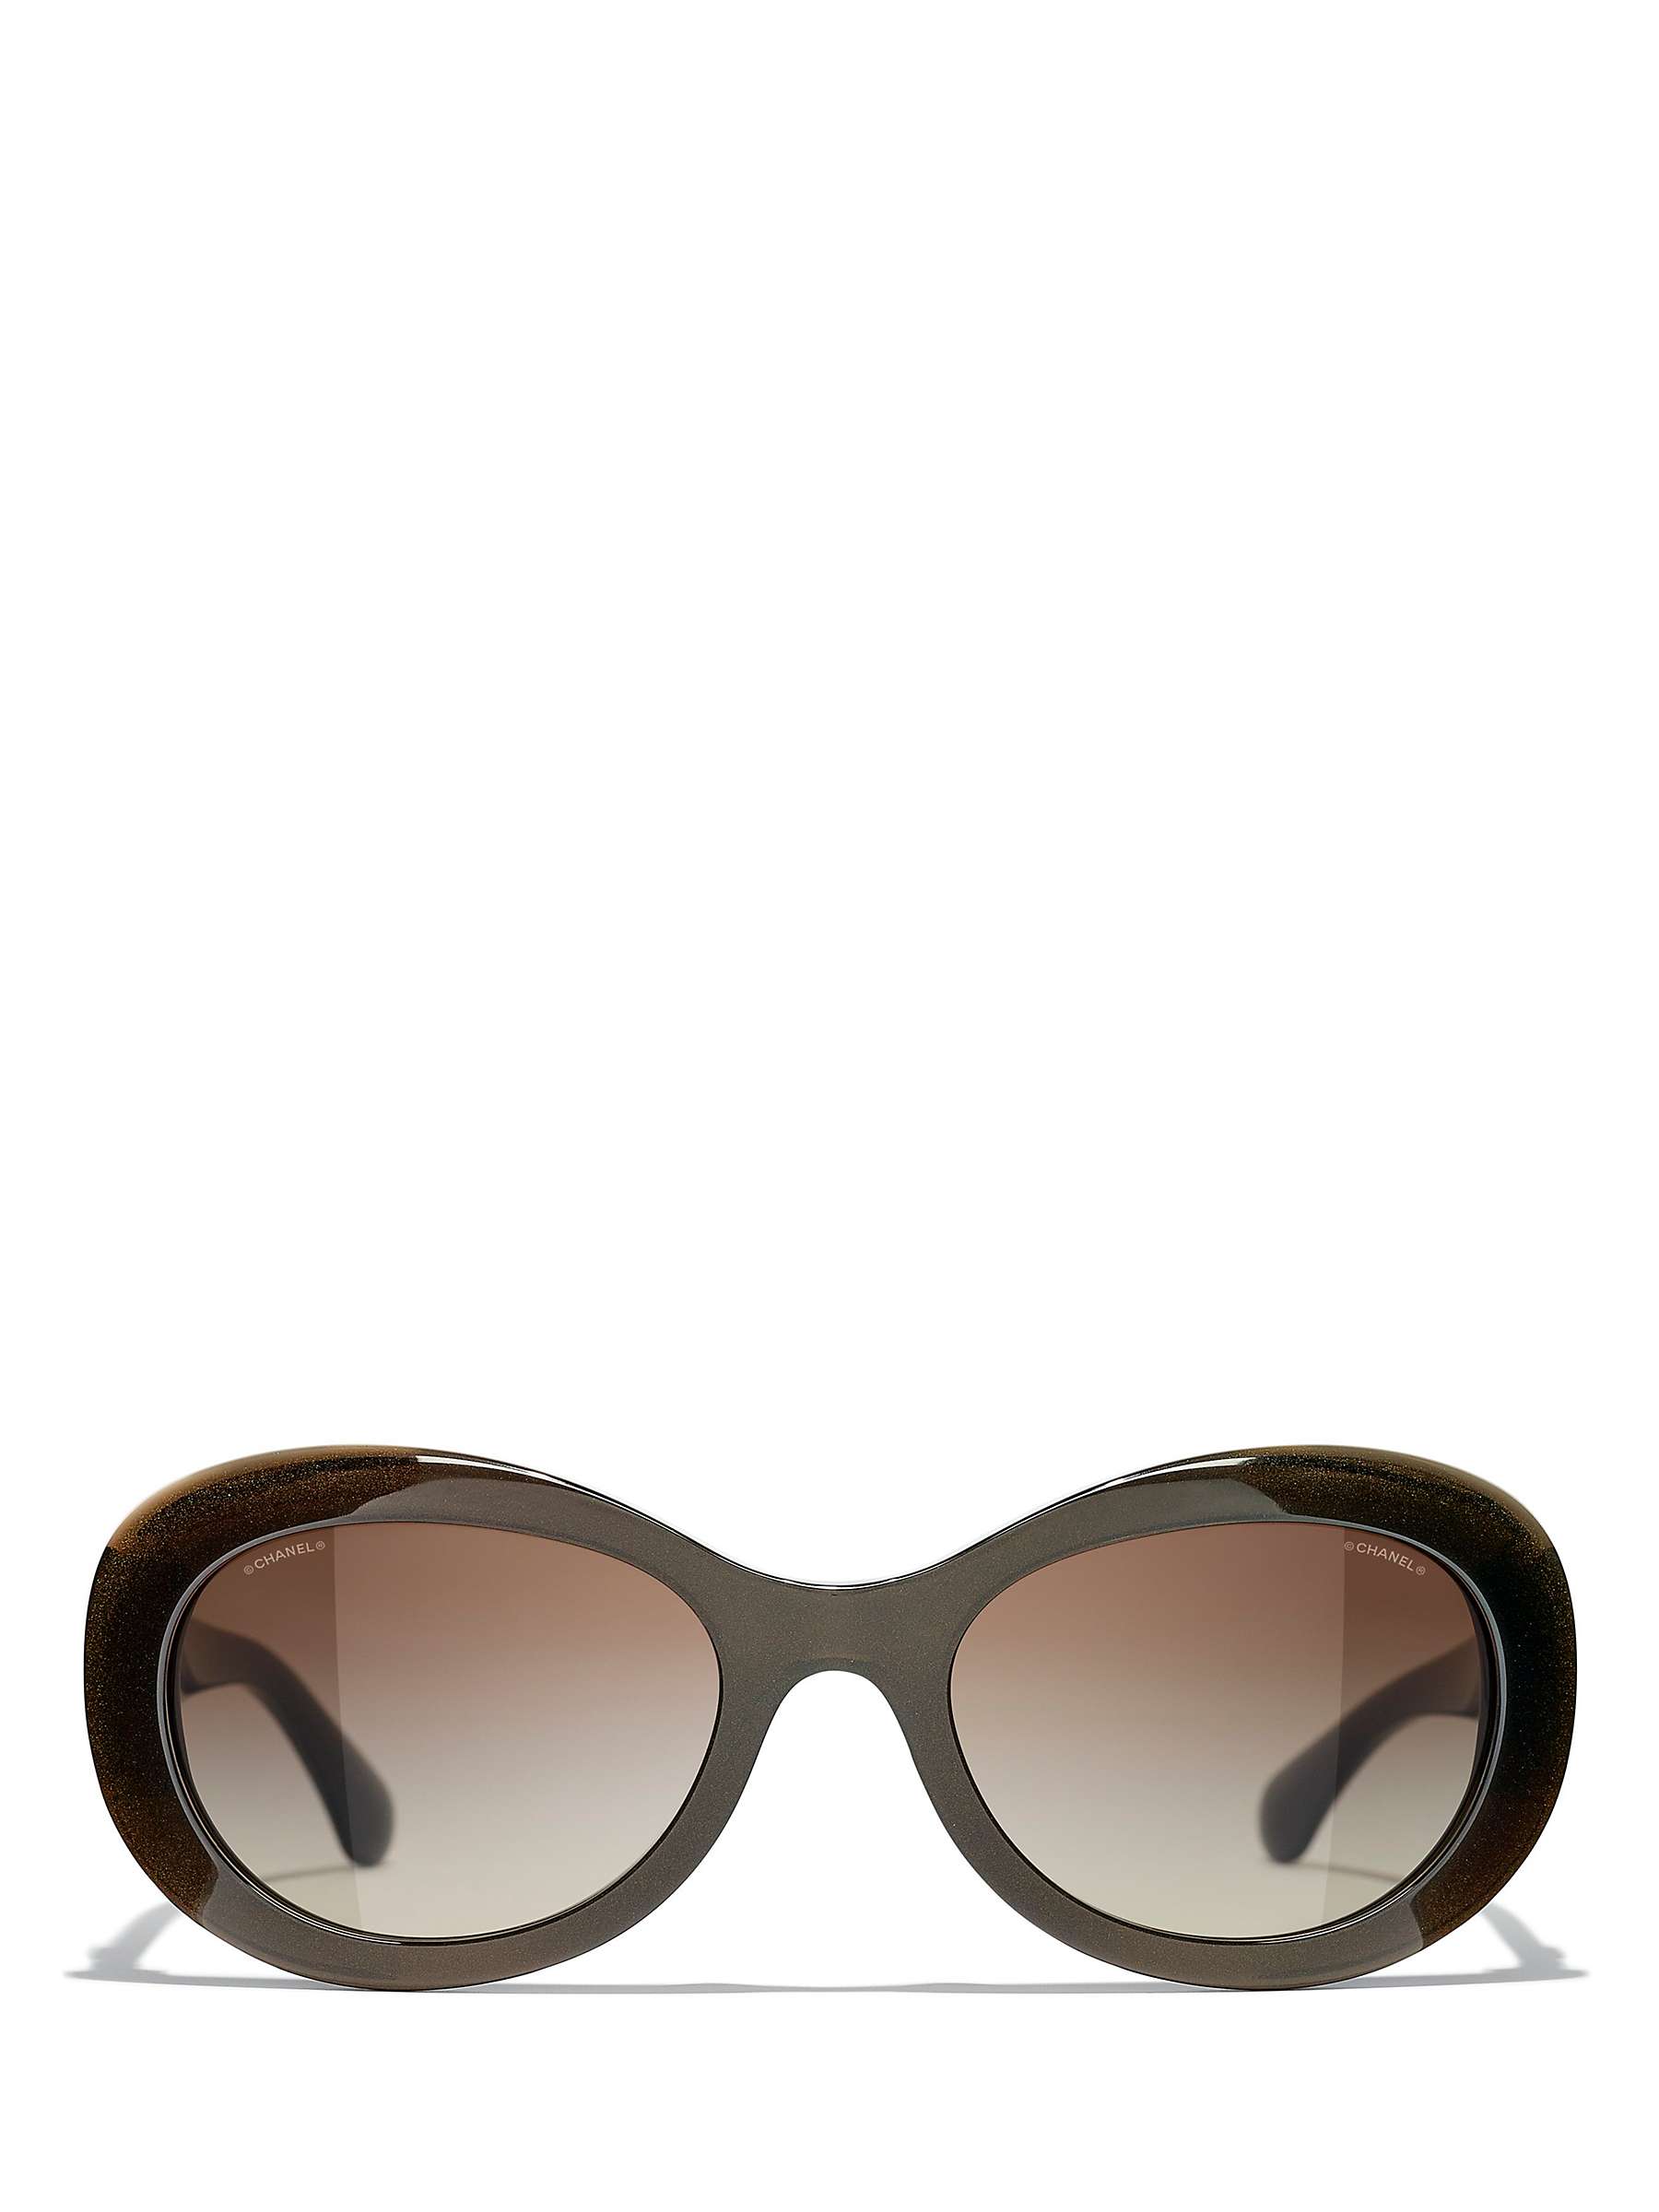 Buy CHANEL Oval Sunglasses CH5469B Iridescent Brown/Brown Gradient Online at johnlewis.com